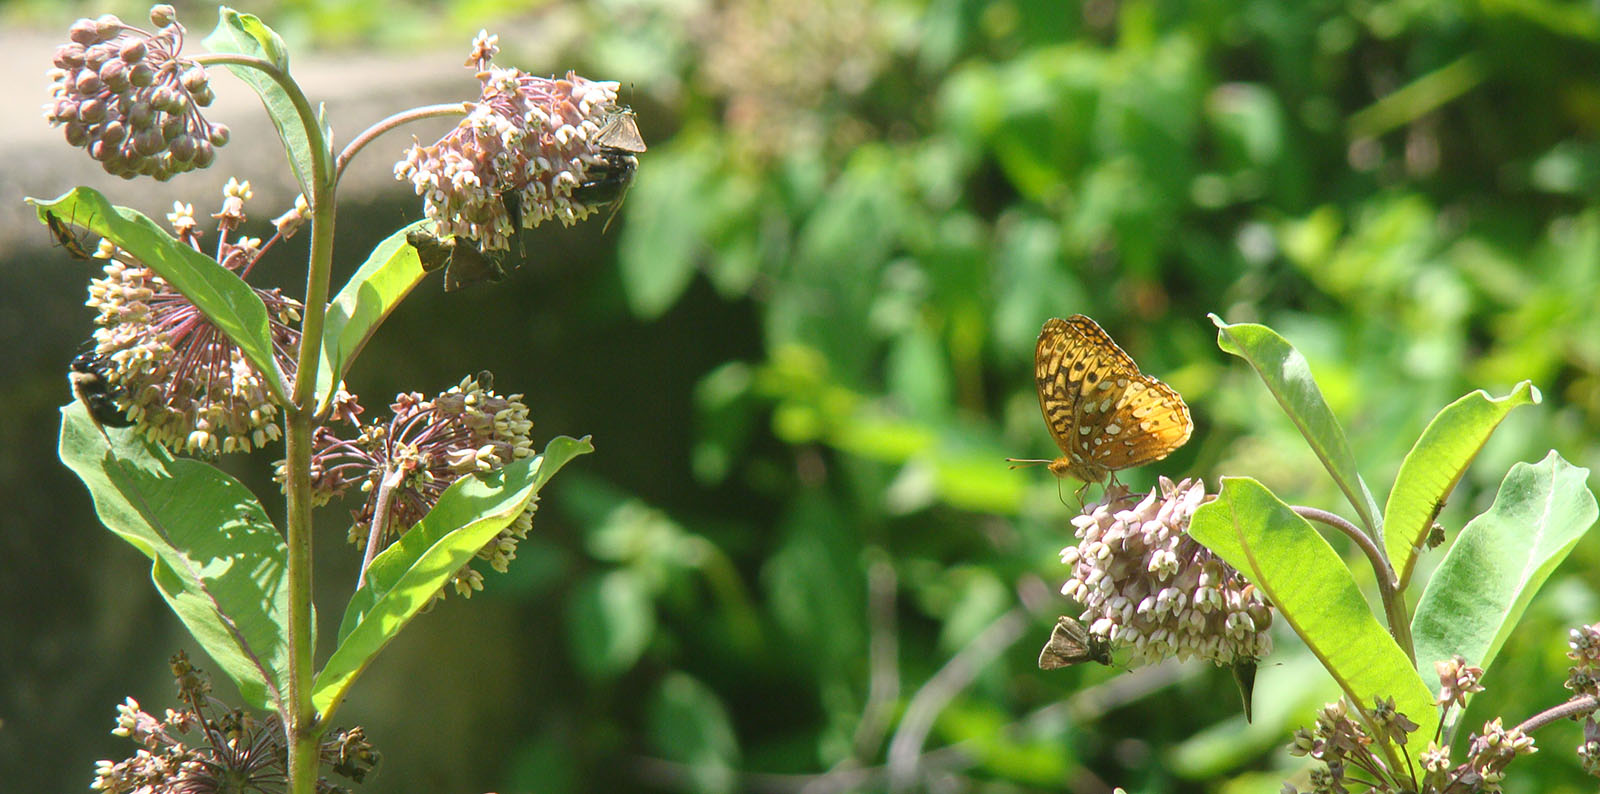 A photo of one large yellow butterfly on a flower, with many smaller, brown butterflies on flowers next to it.